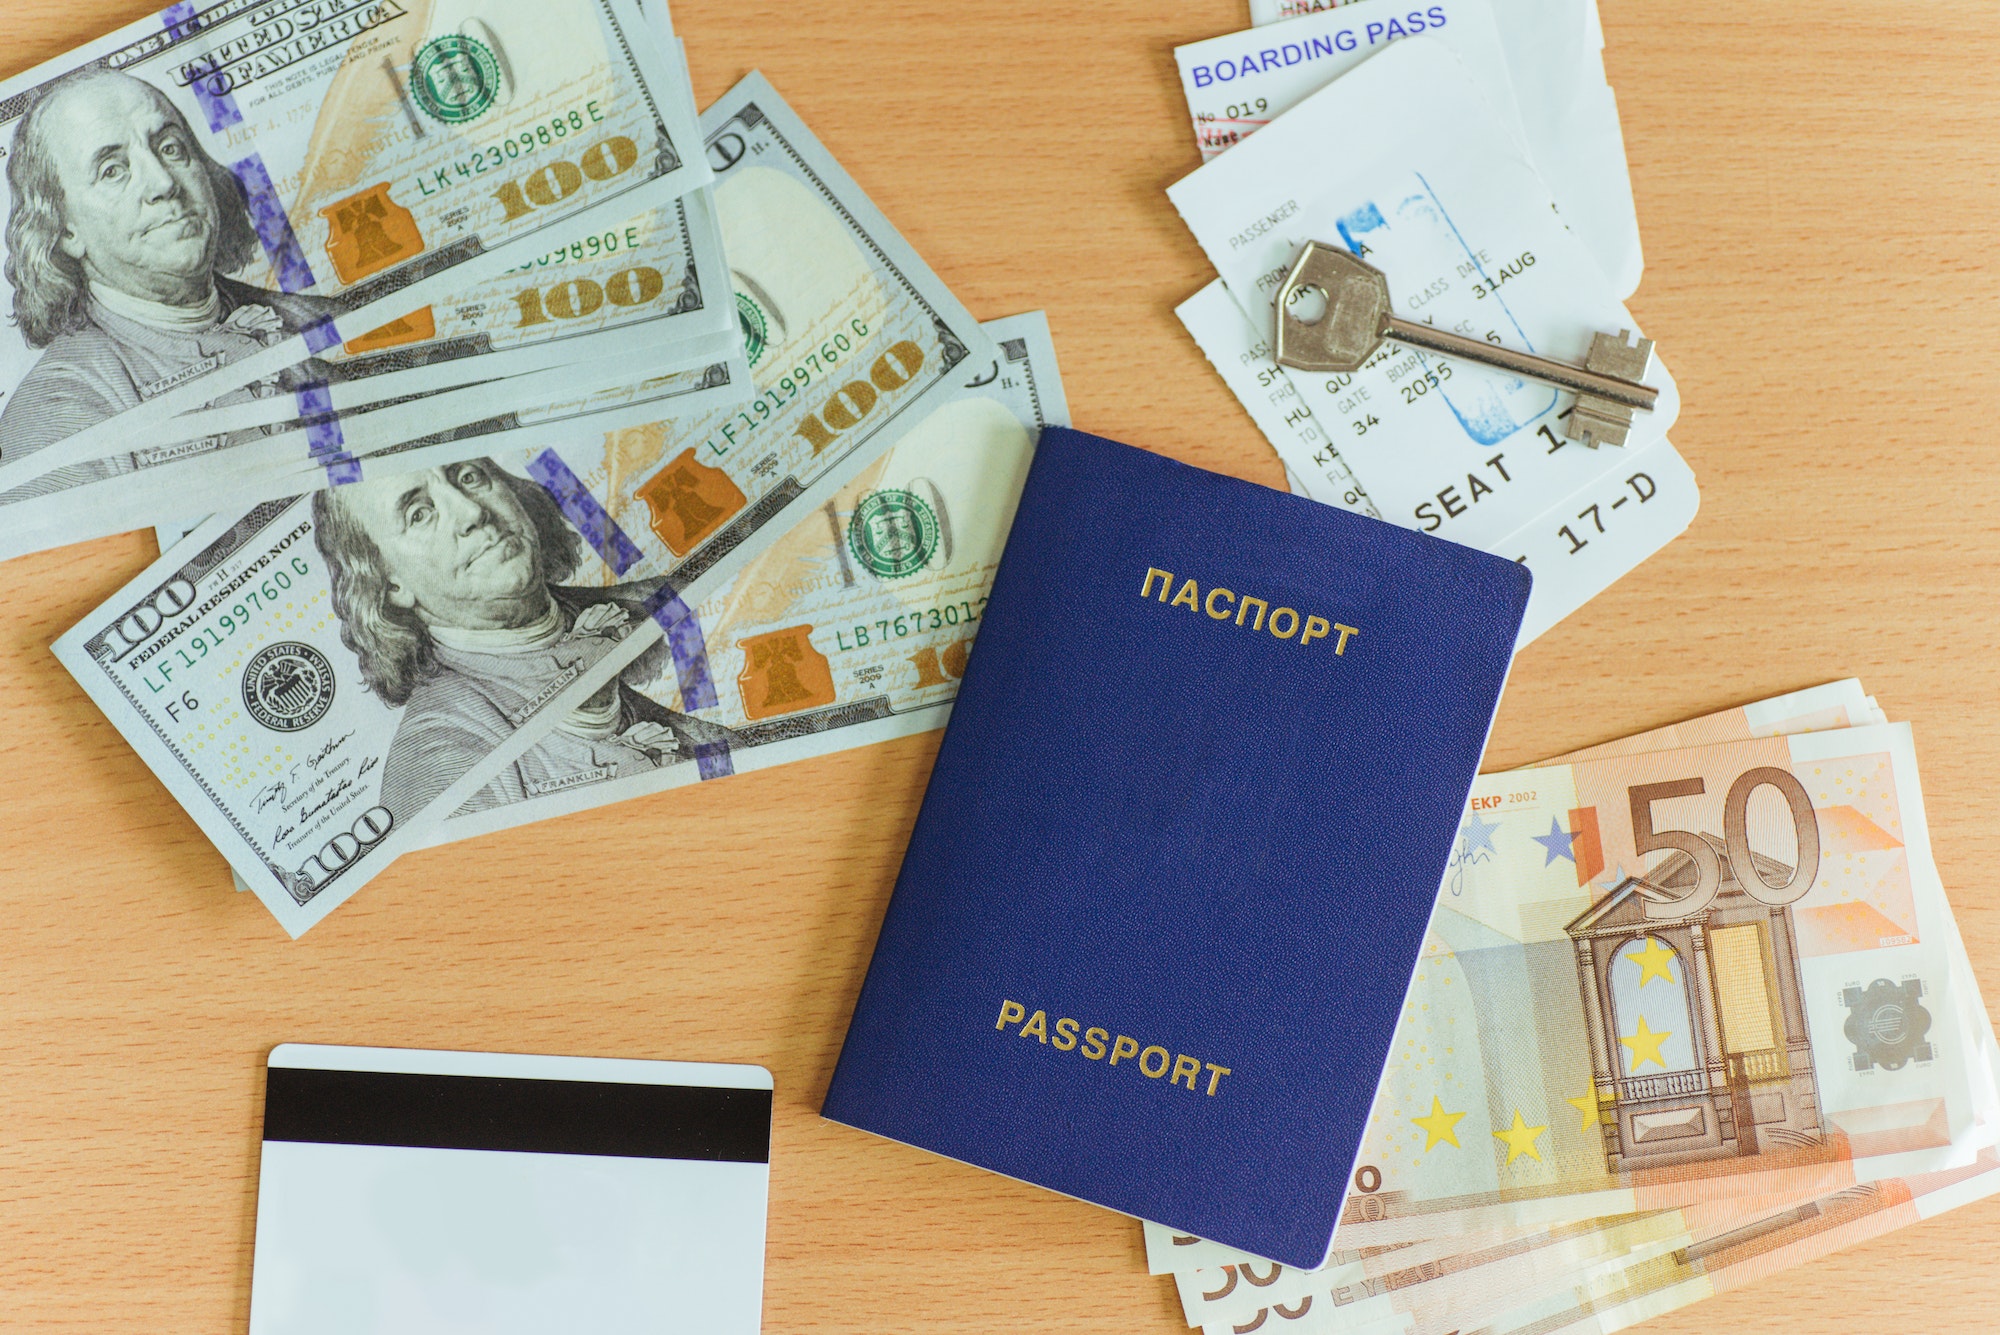 Passport Card: How Much Does It Cost?